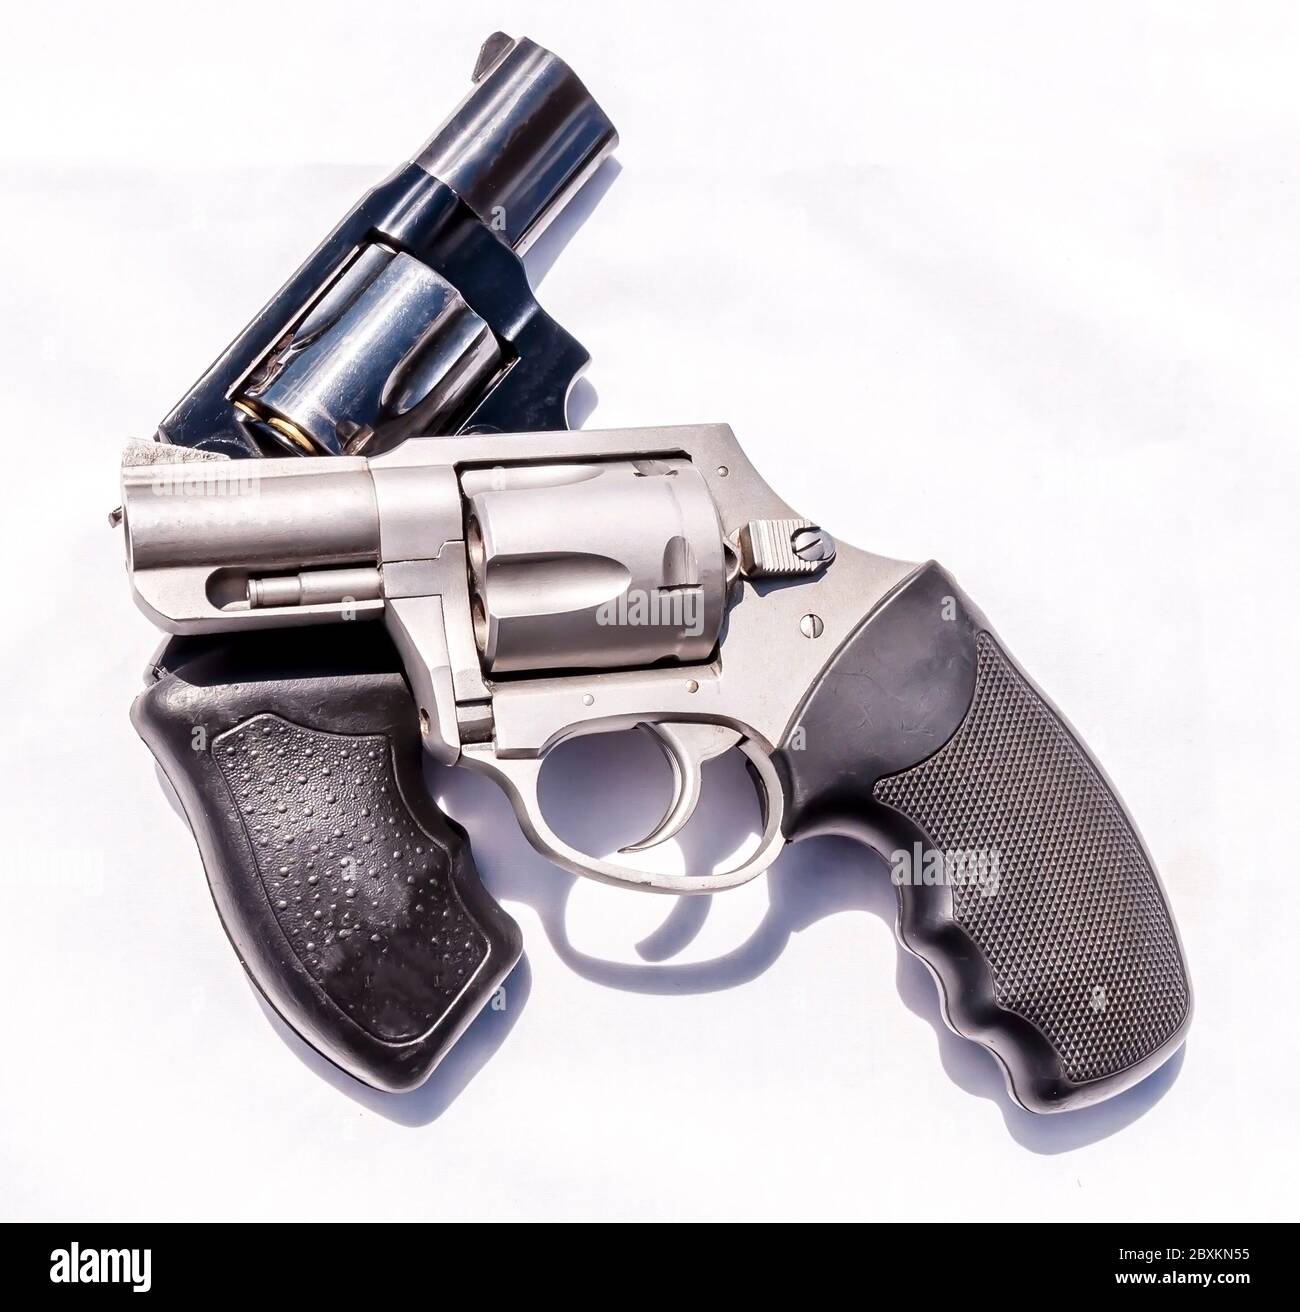 Two handguns, a stainless steel 357 and a black 38 special revolver on a white background Stock Photo